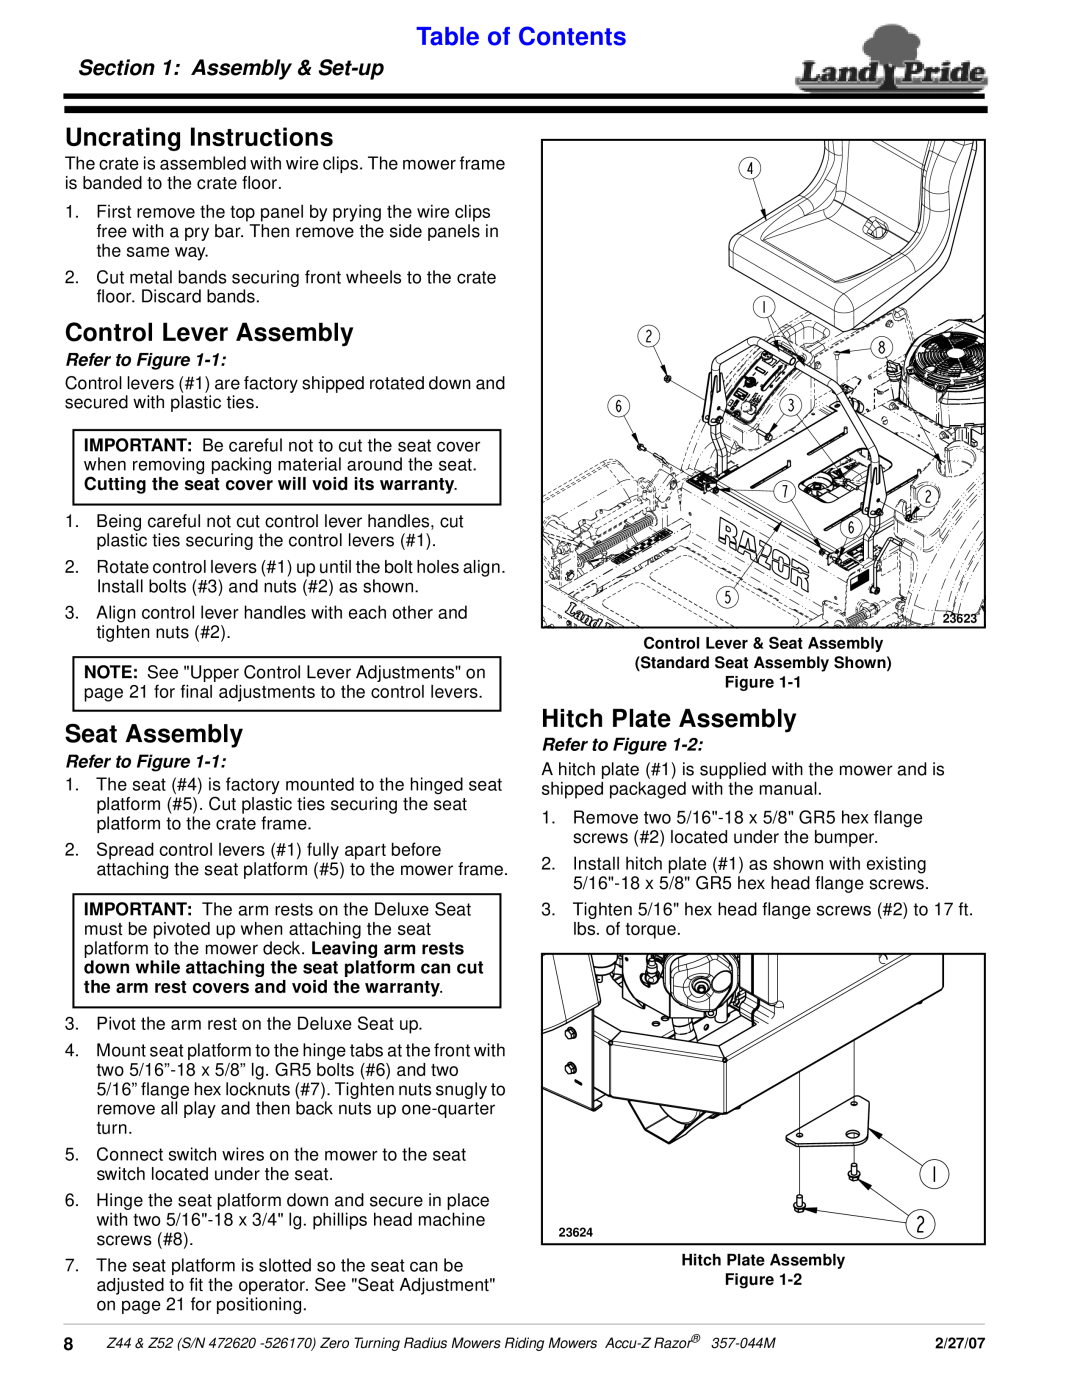 Land Pride 357-044M Uncrating Instructions, Control Lever Assembly, Seat Assembly, Hitch Plate Assembly, Assembly & Set-up 